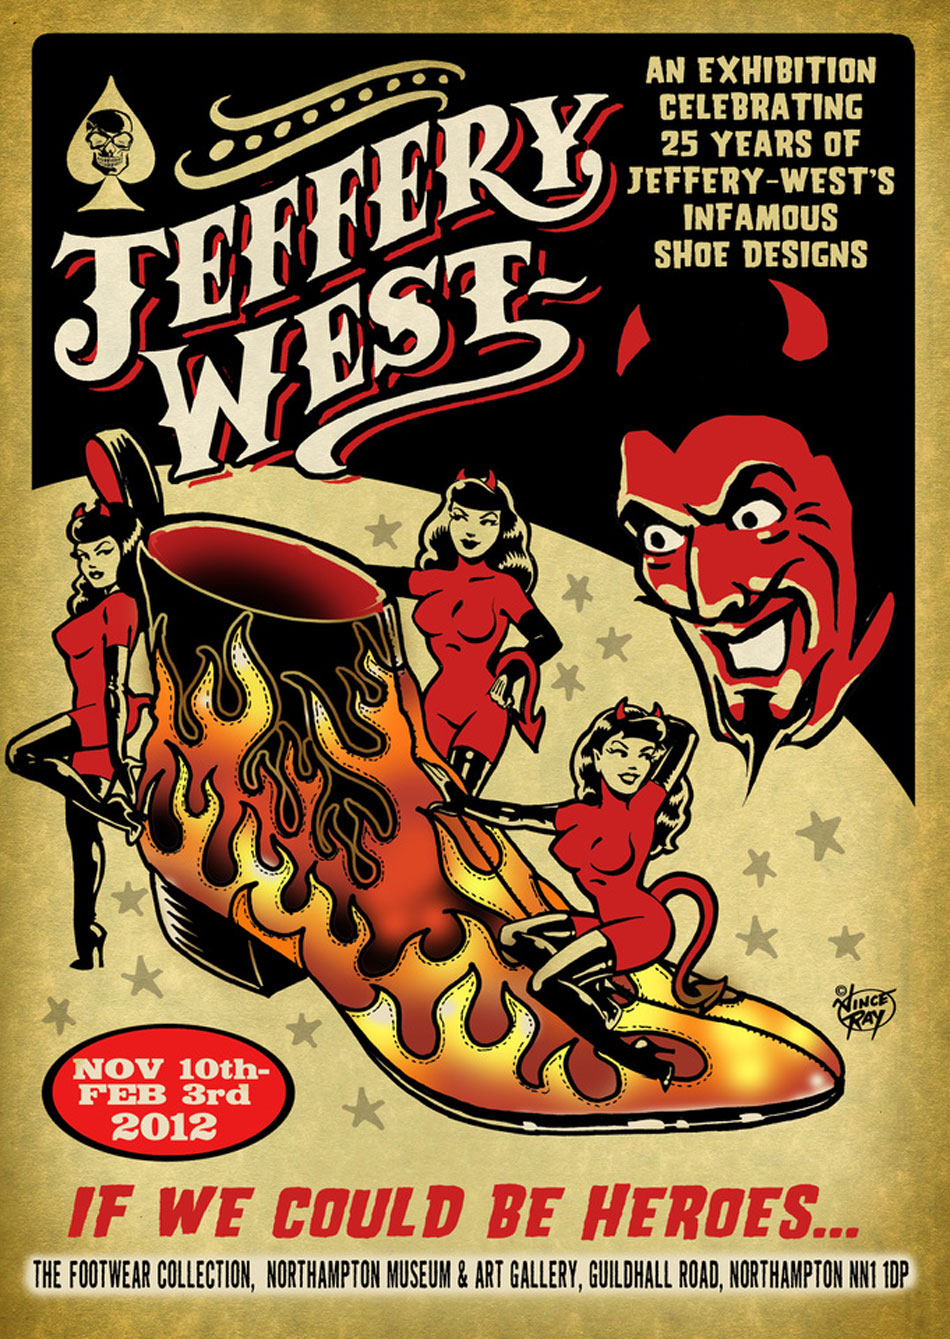 "If we could be Heroes" / Jeffrey West 25th Anniversary